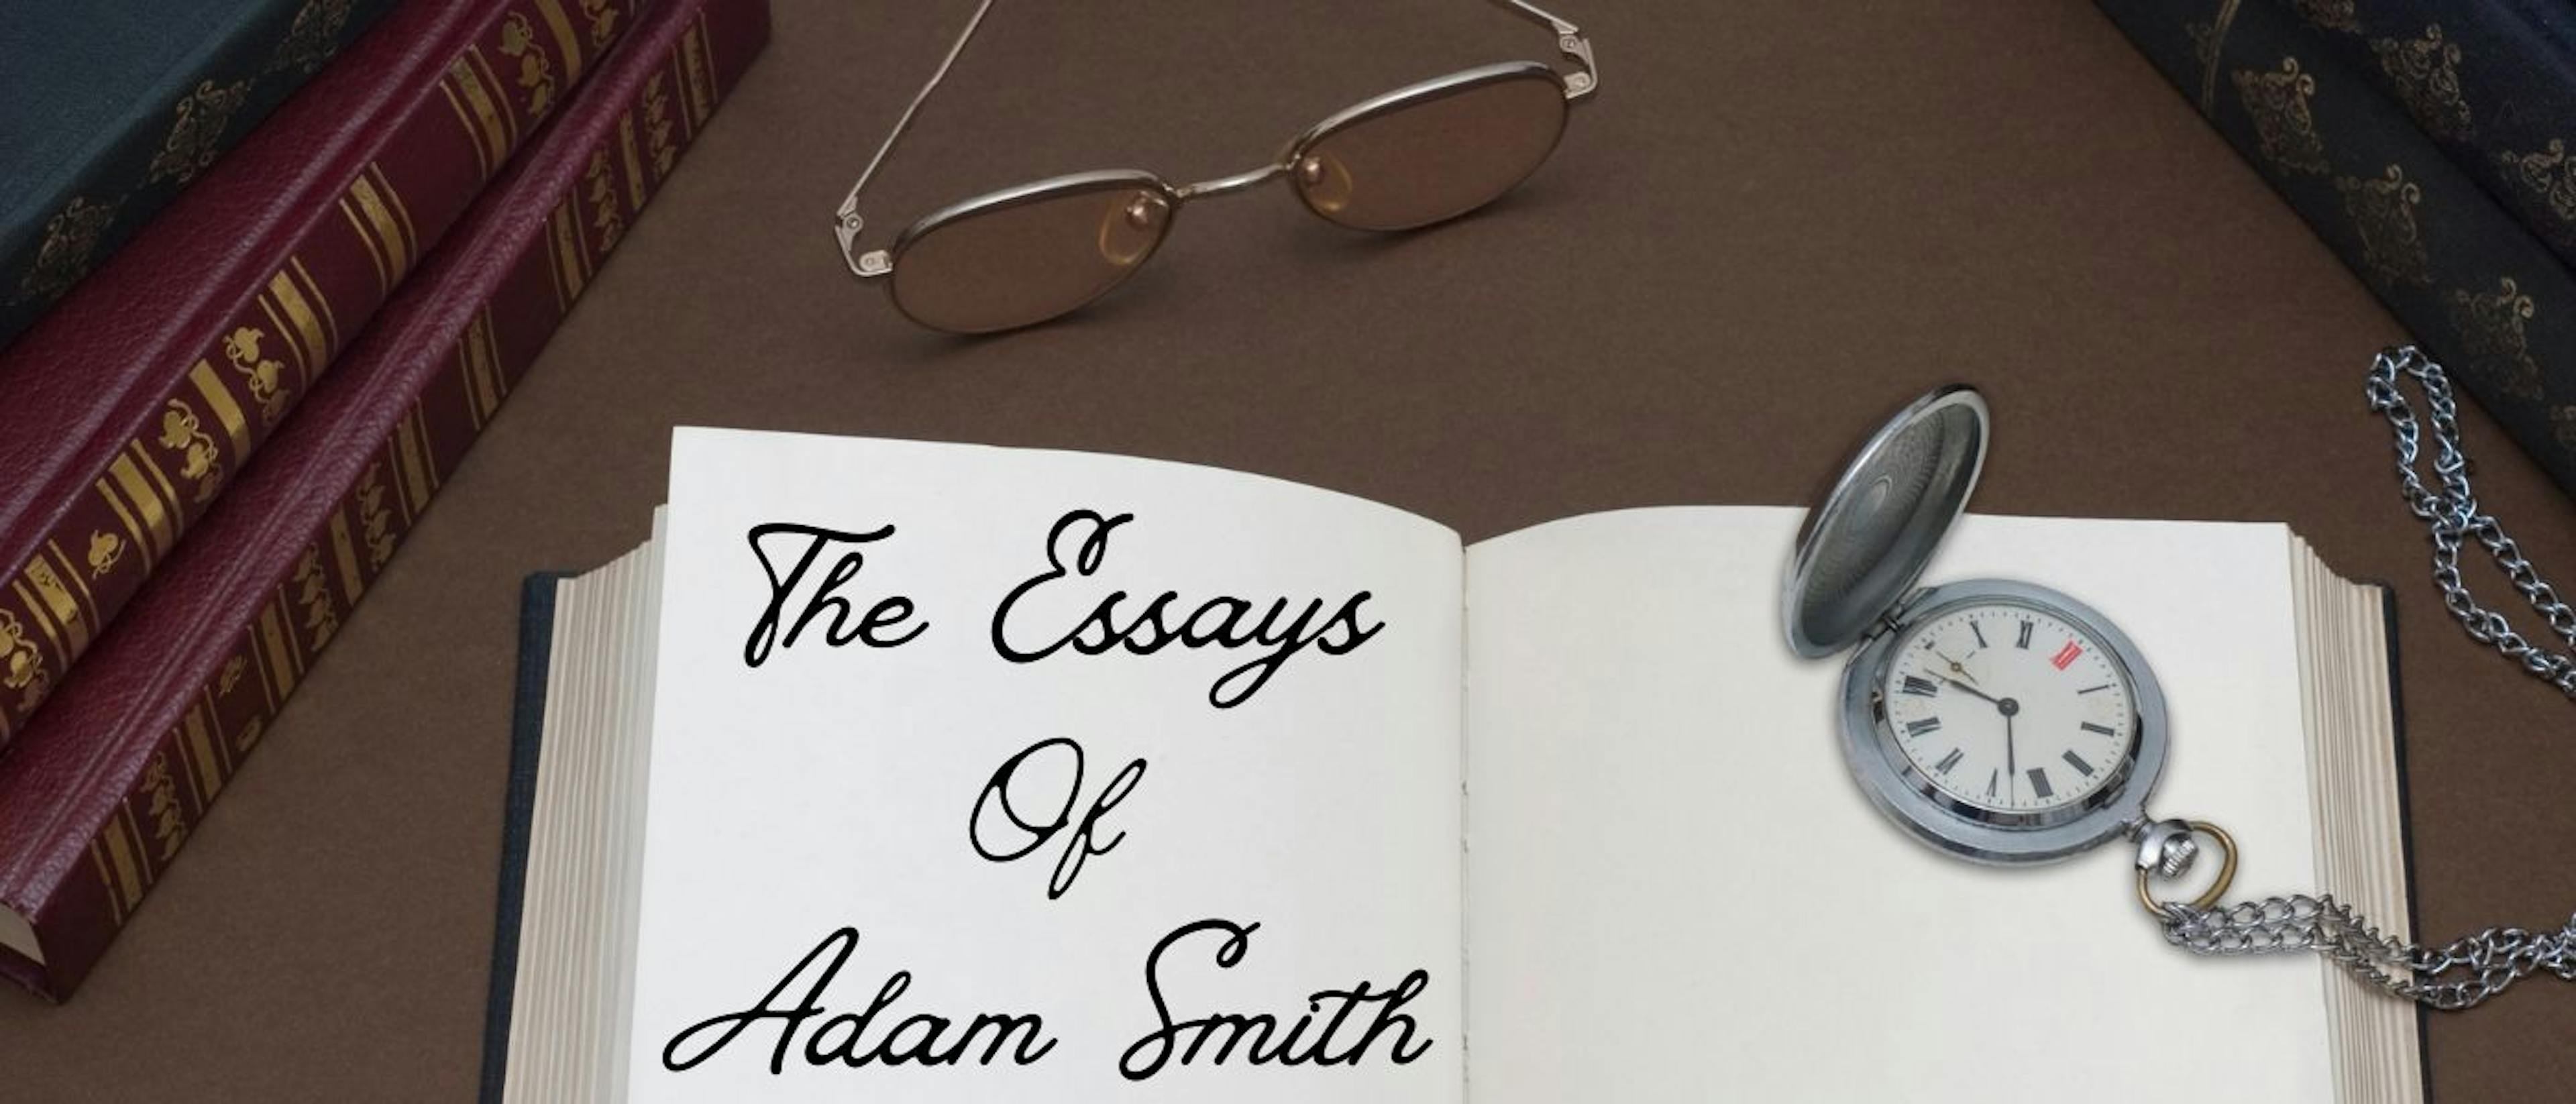 featured image - The Essays of Adam Smith: Part I,
SEC. I - OF THE SENSE OF PROPRIETY, Chapter I